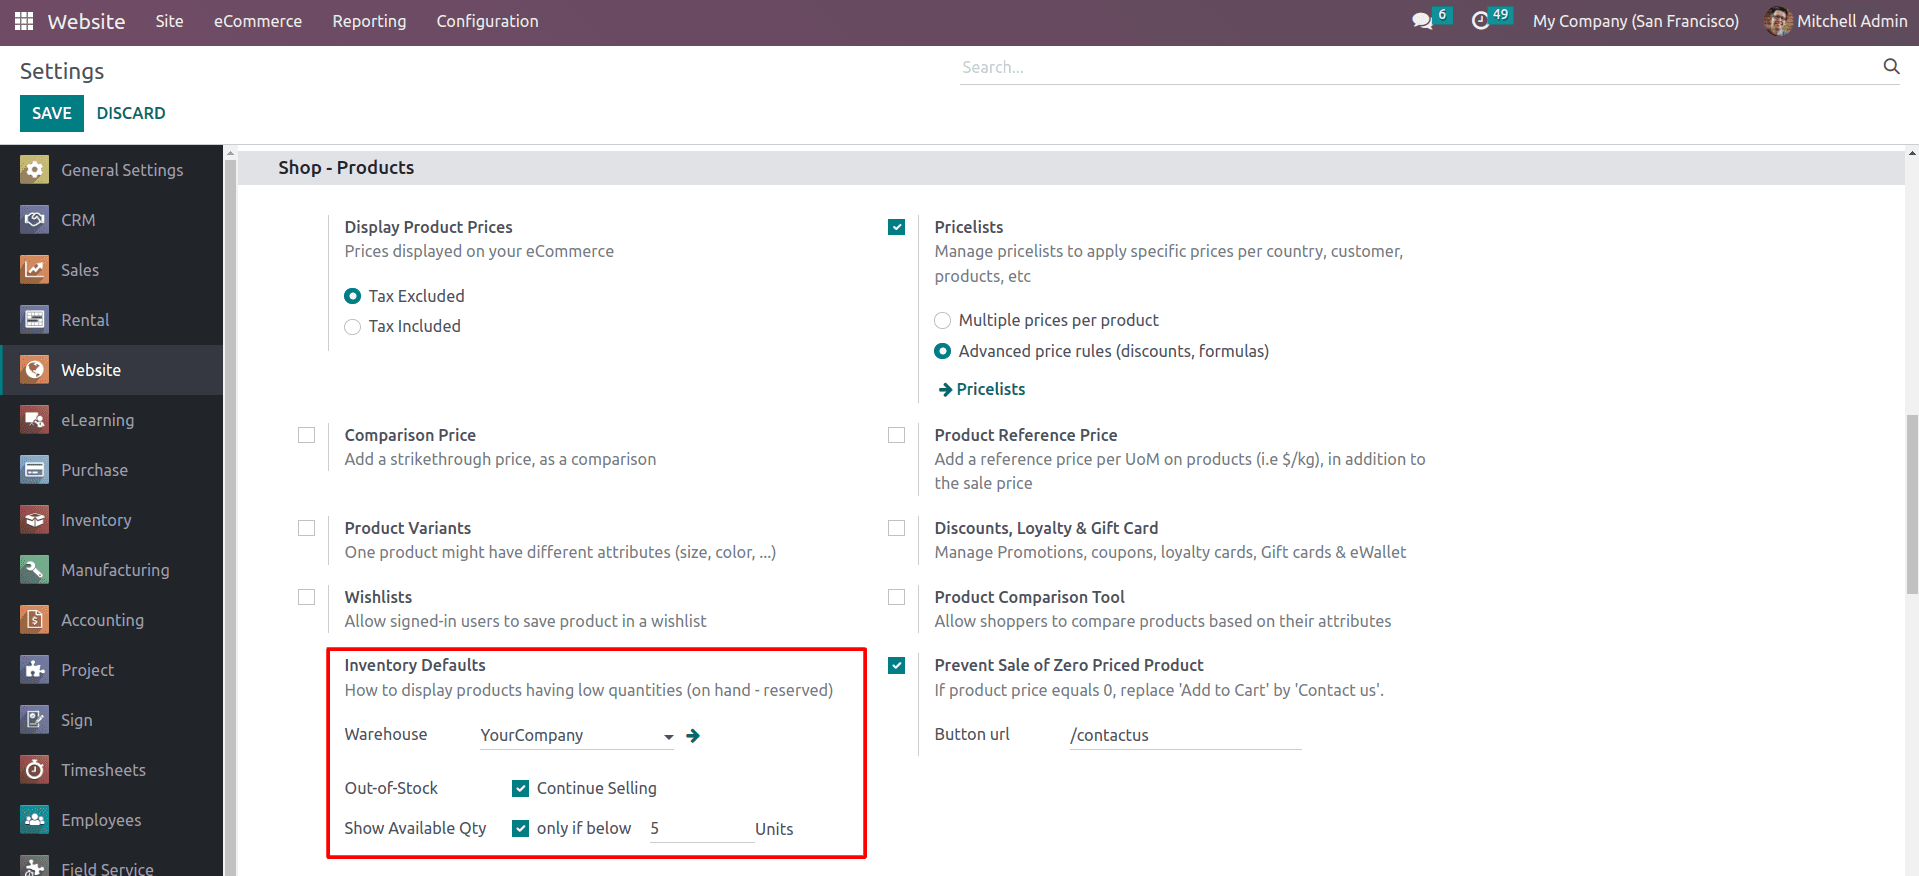 An Overview of Inventory Defaults & Preventing the Sale of Zero-priced Products in Odoo 16 Website-cybrosys